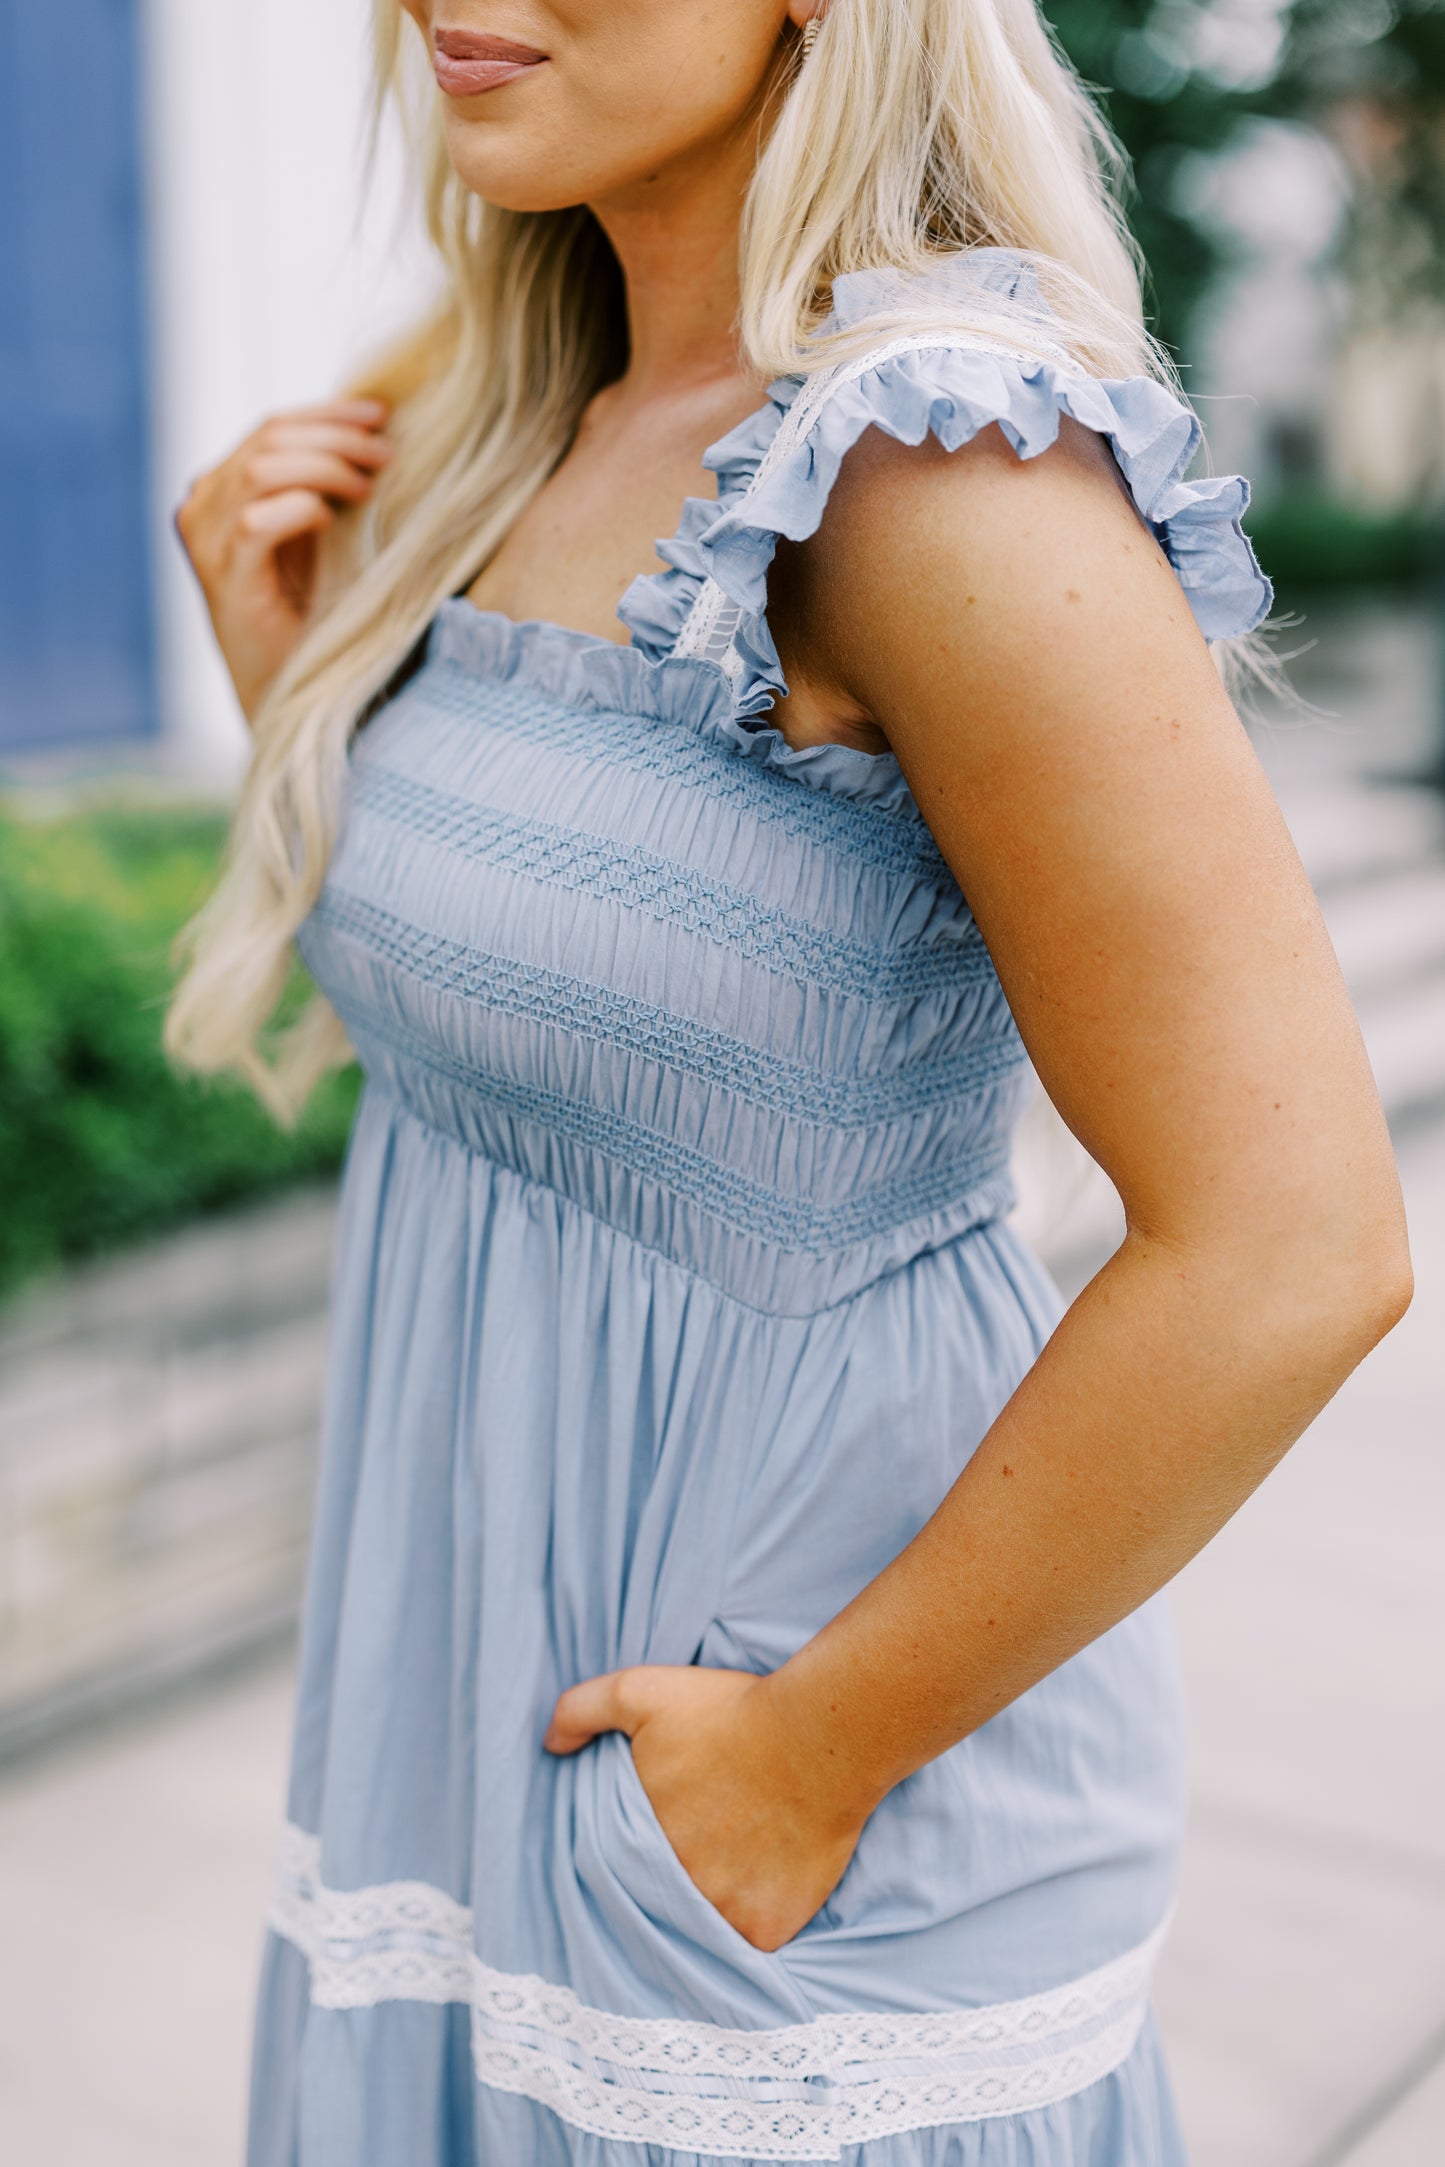 The Paisley Dress in Baby Blue